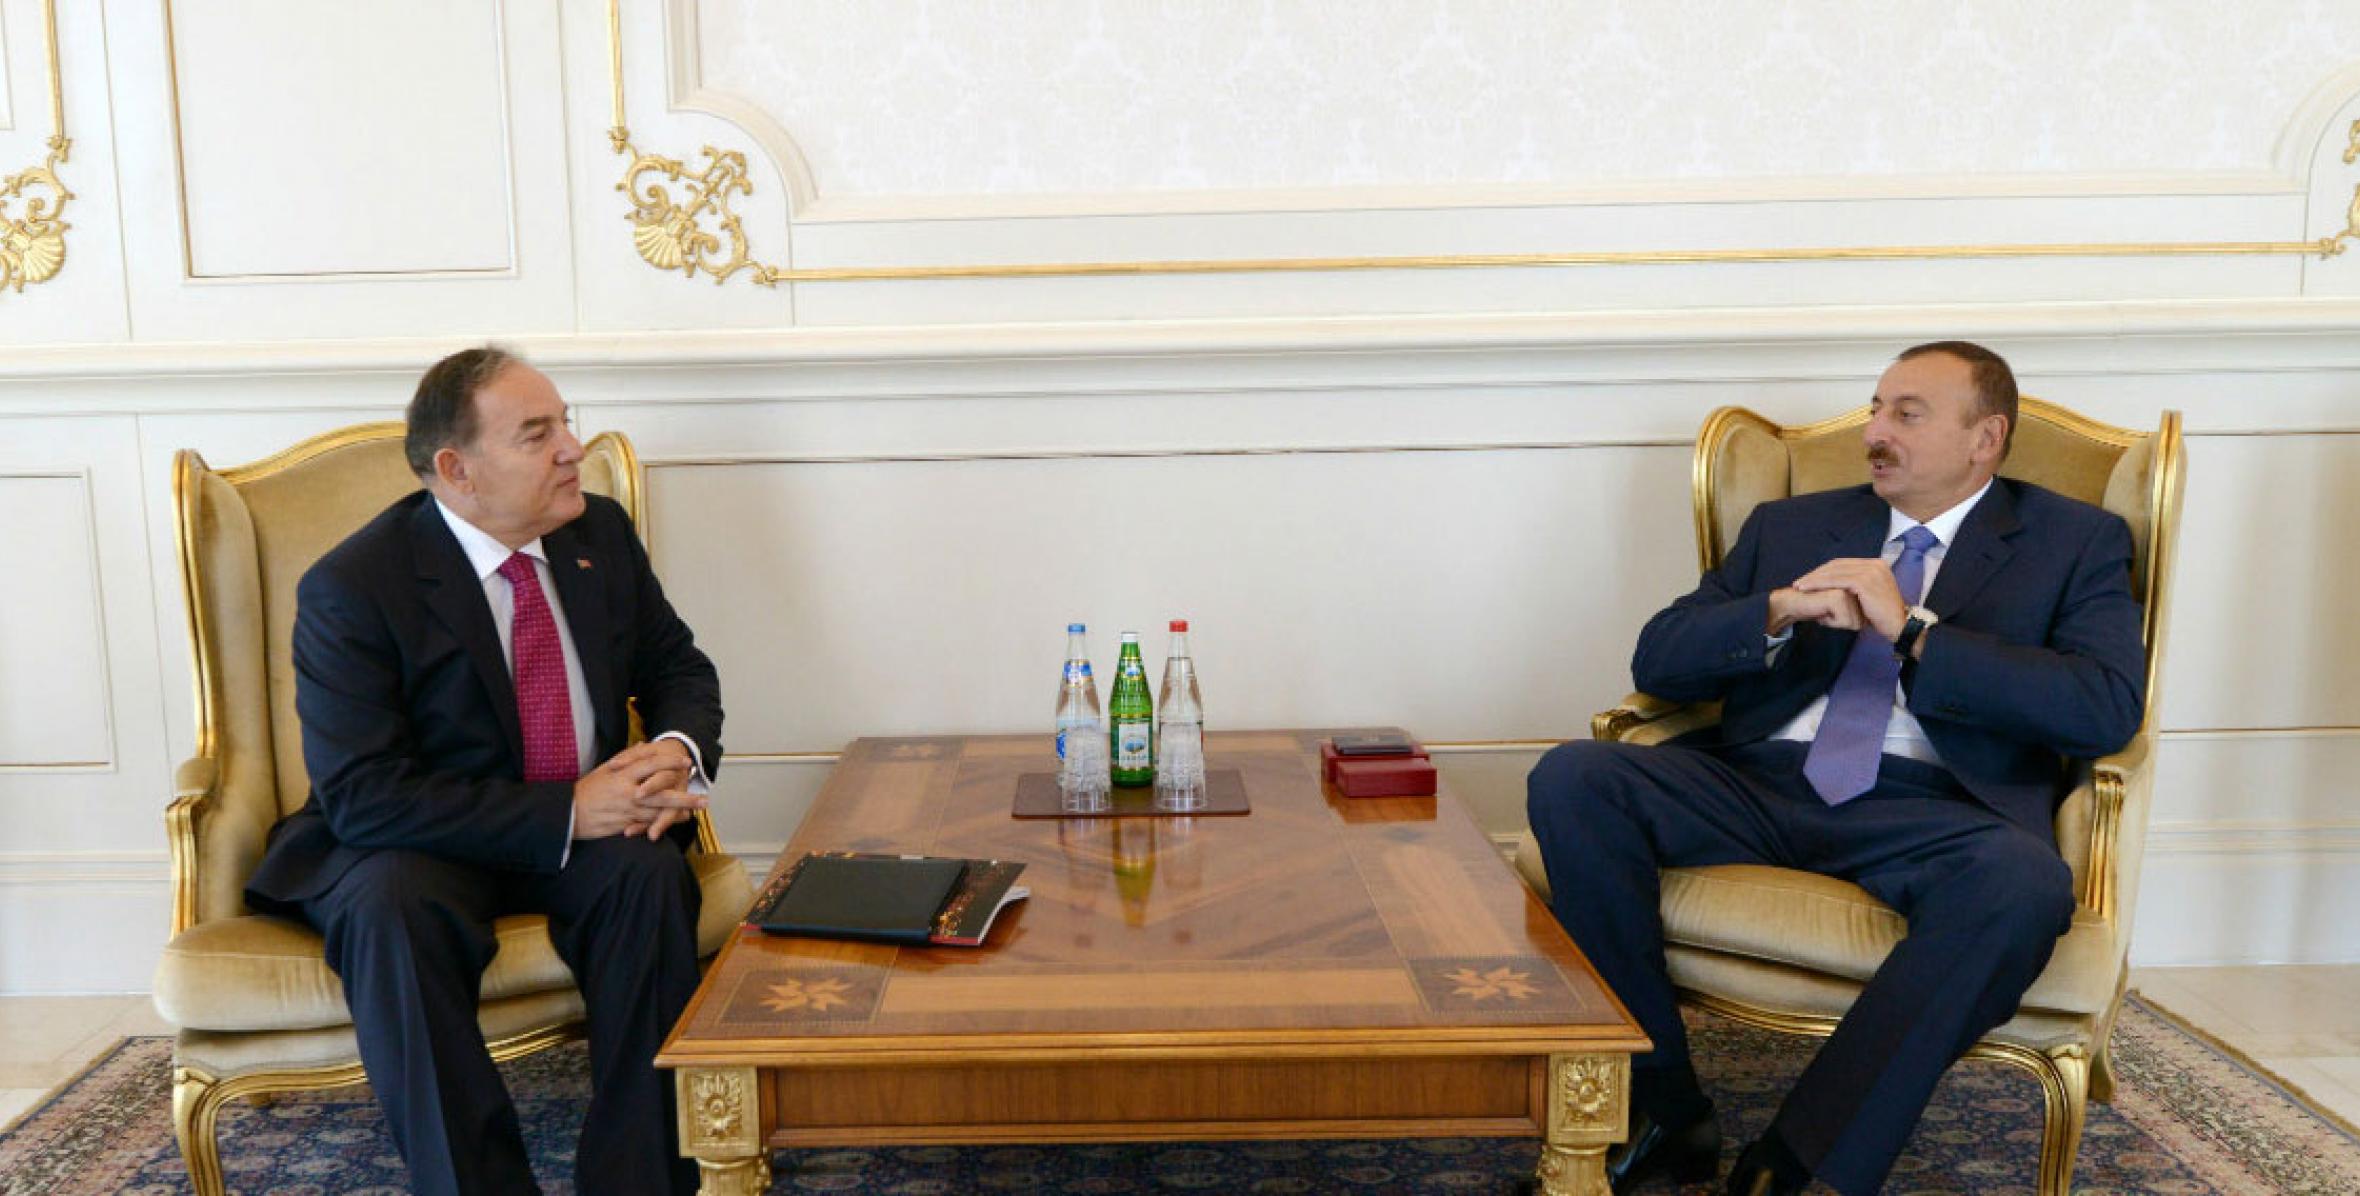 Ilham Aliyev received the outgoing Turkish ambassador at the end of his diplomatic mission in Azerbaijan